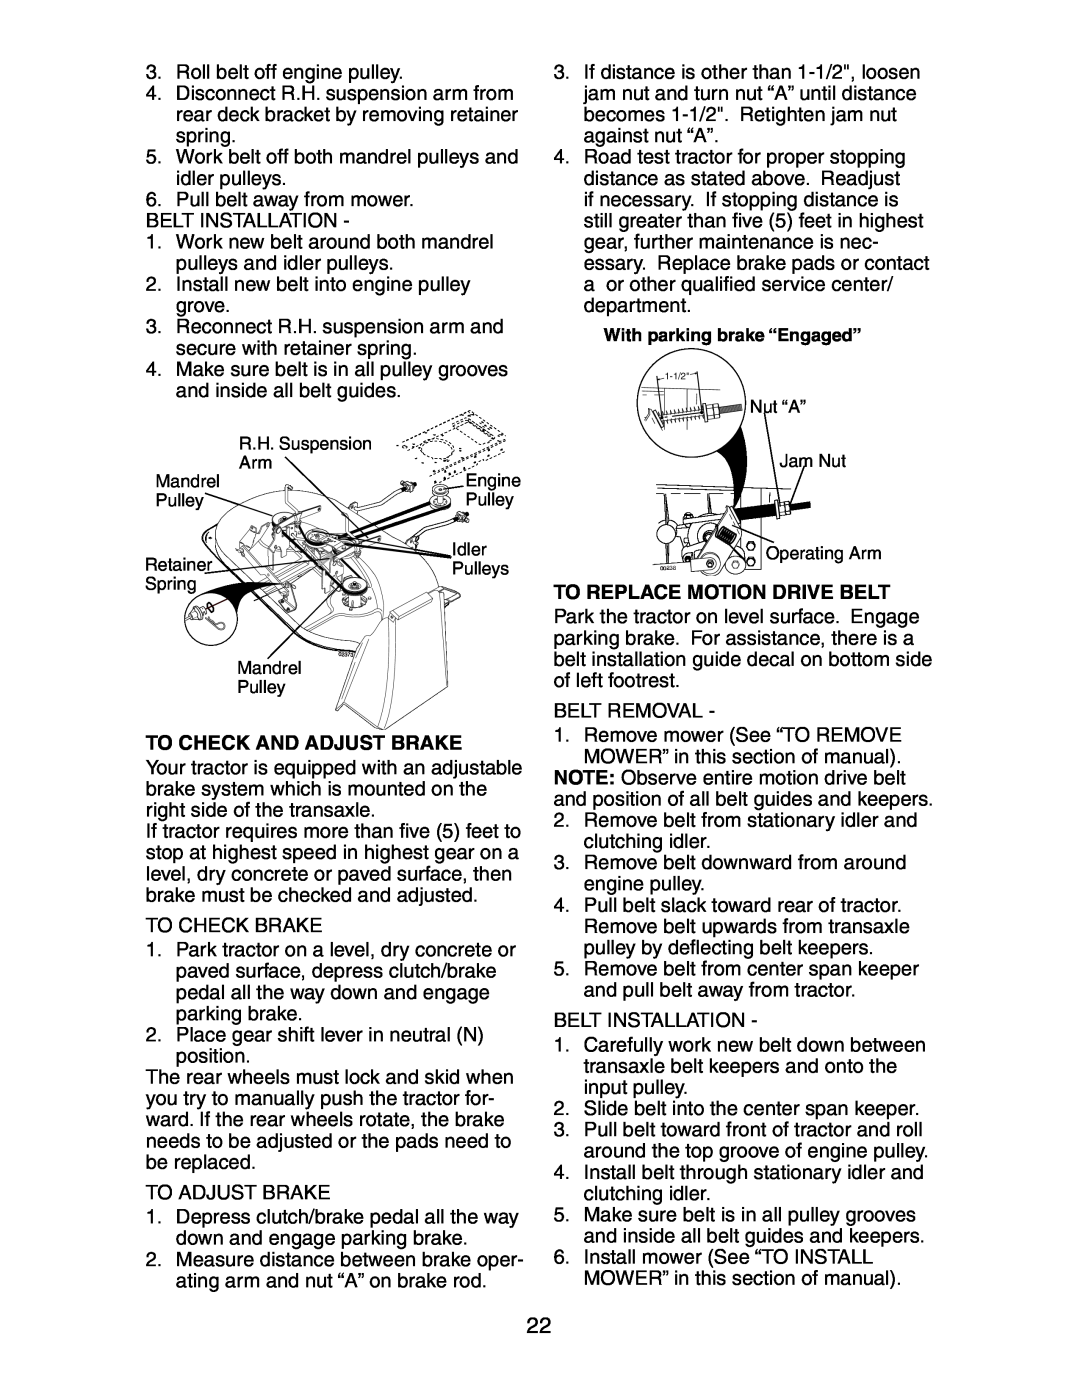 Poulan 271190, 189956 manual To Check And Adjust Brake, To Replace Motion Drive Belt, With parking brake “Engaged” 